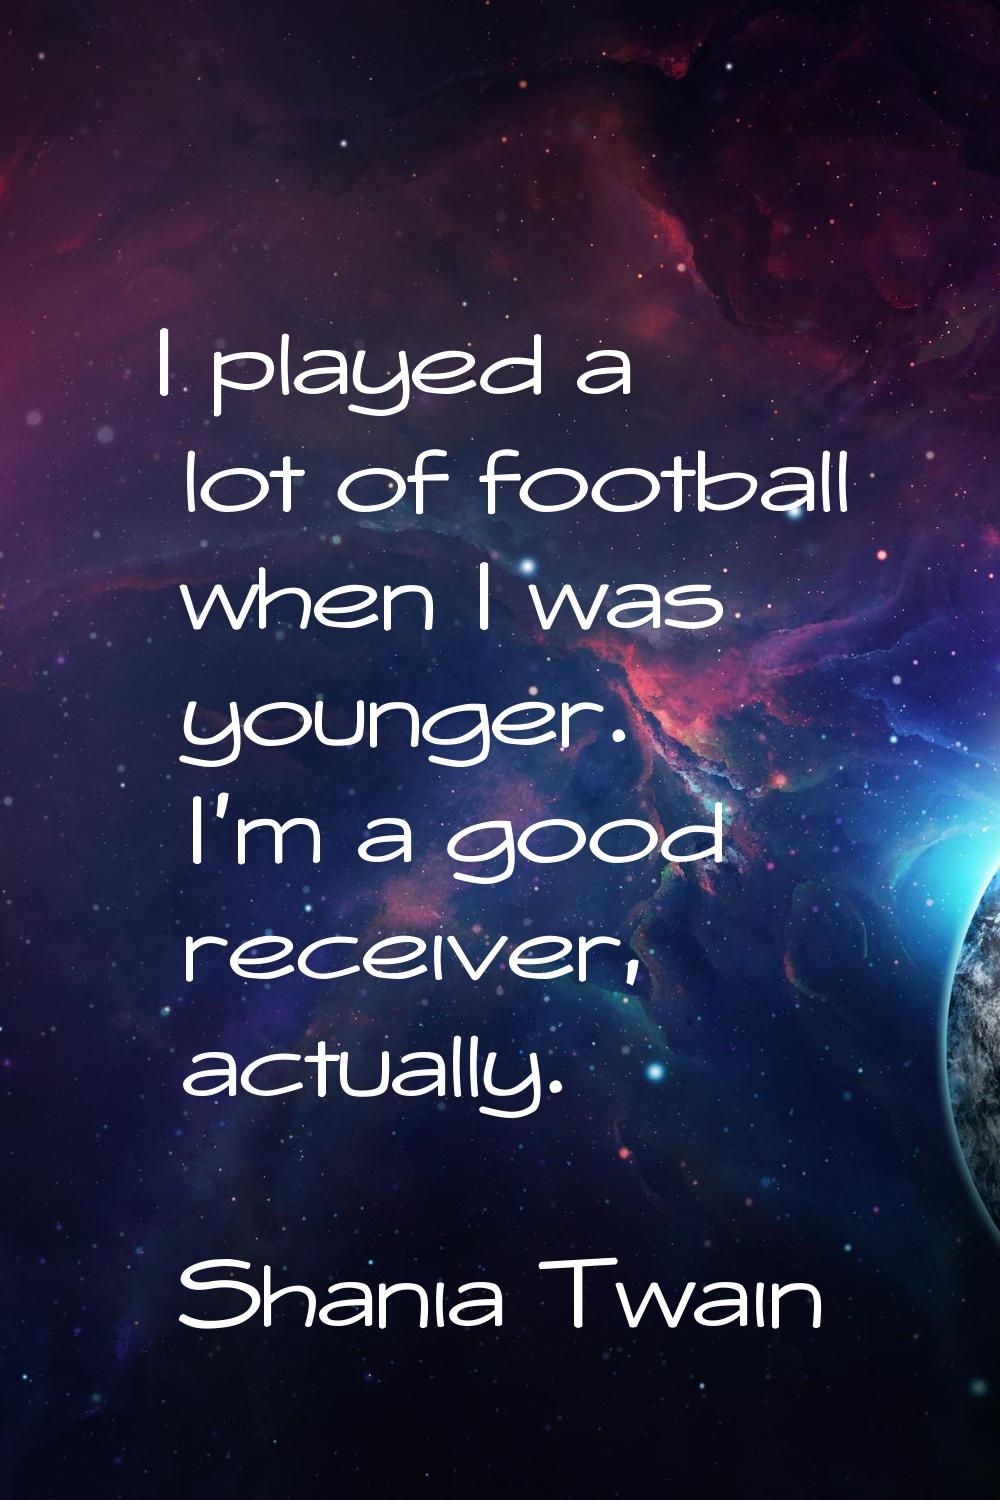 I played a lot of football when I was younger. I'm a good receiver, actually.